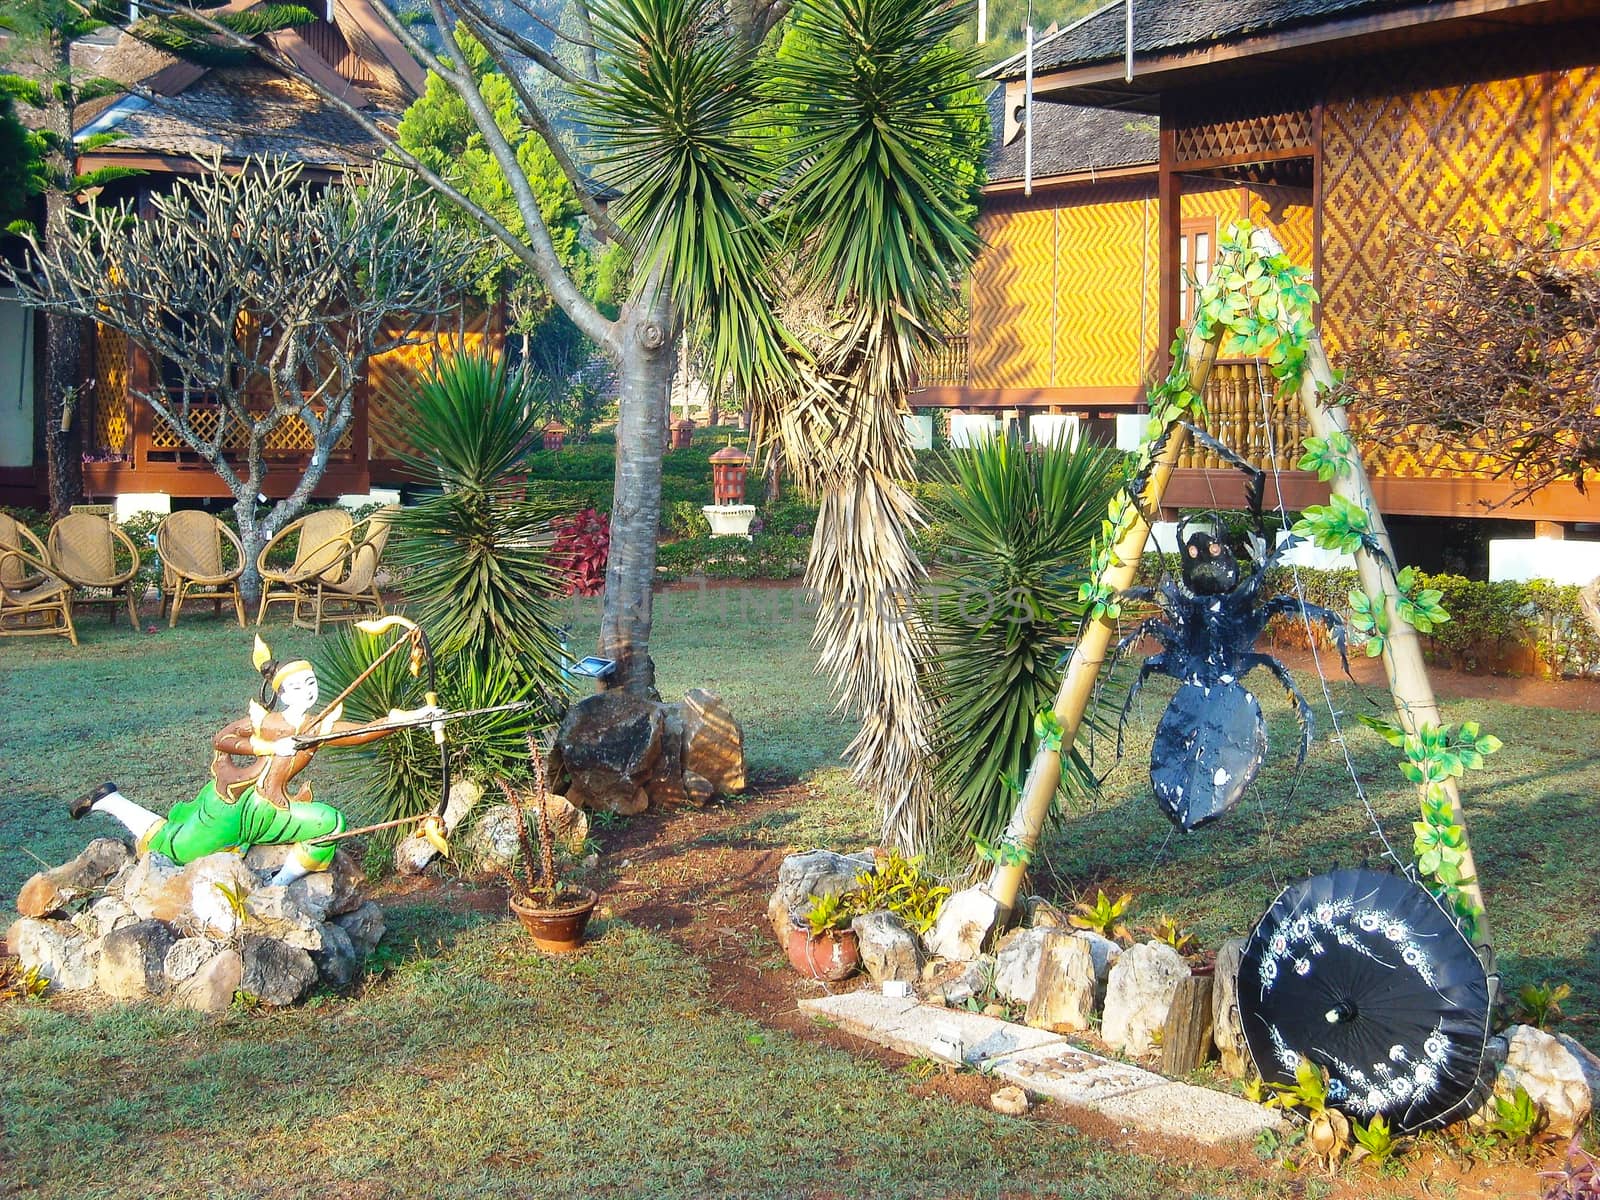 a nice garden with palms and flowers by Tevion25